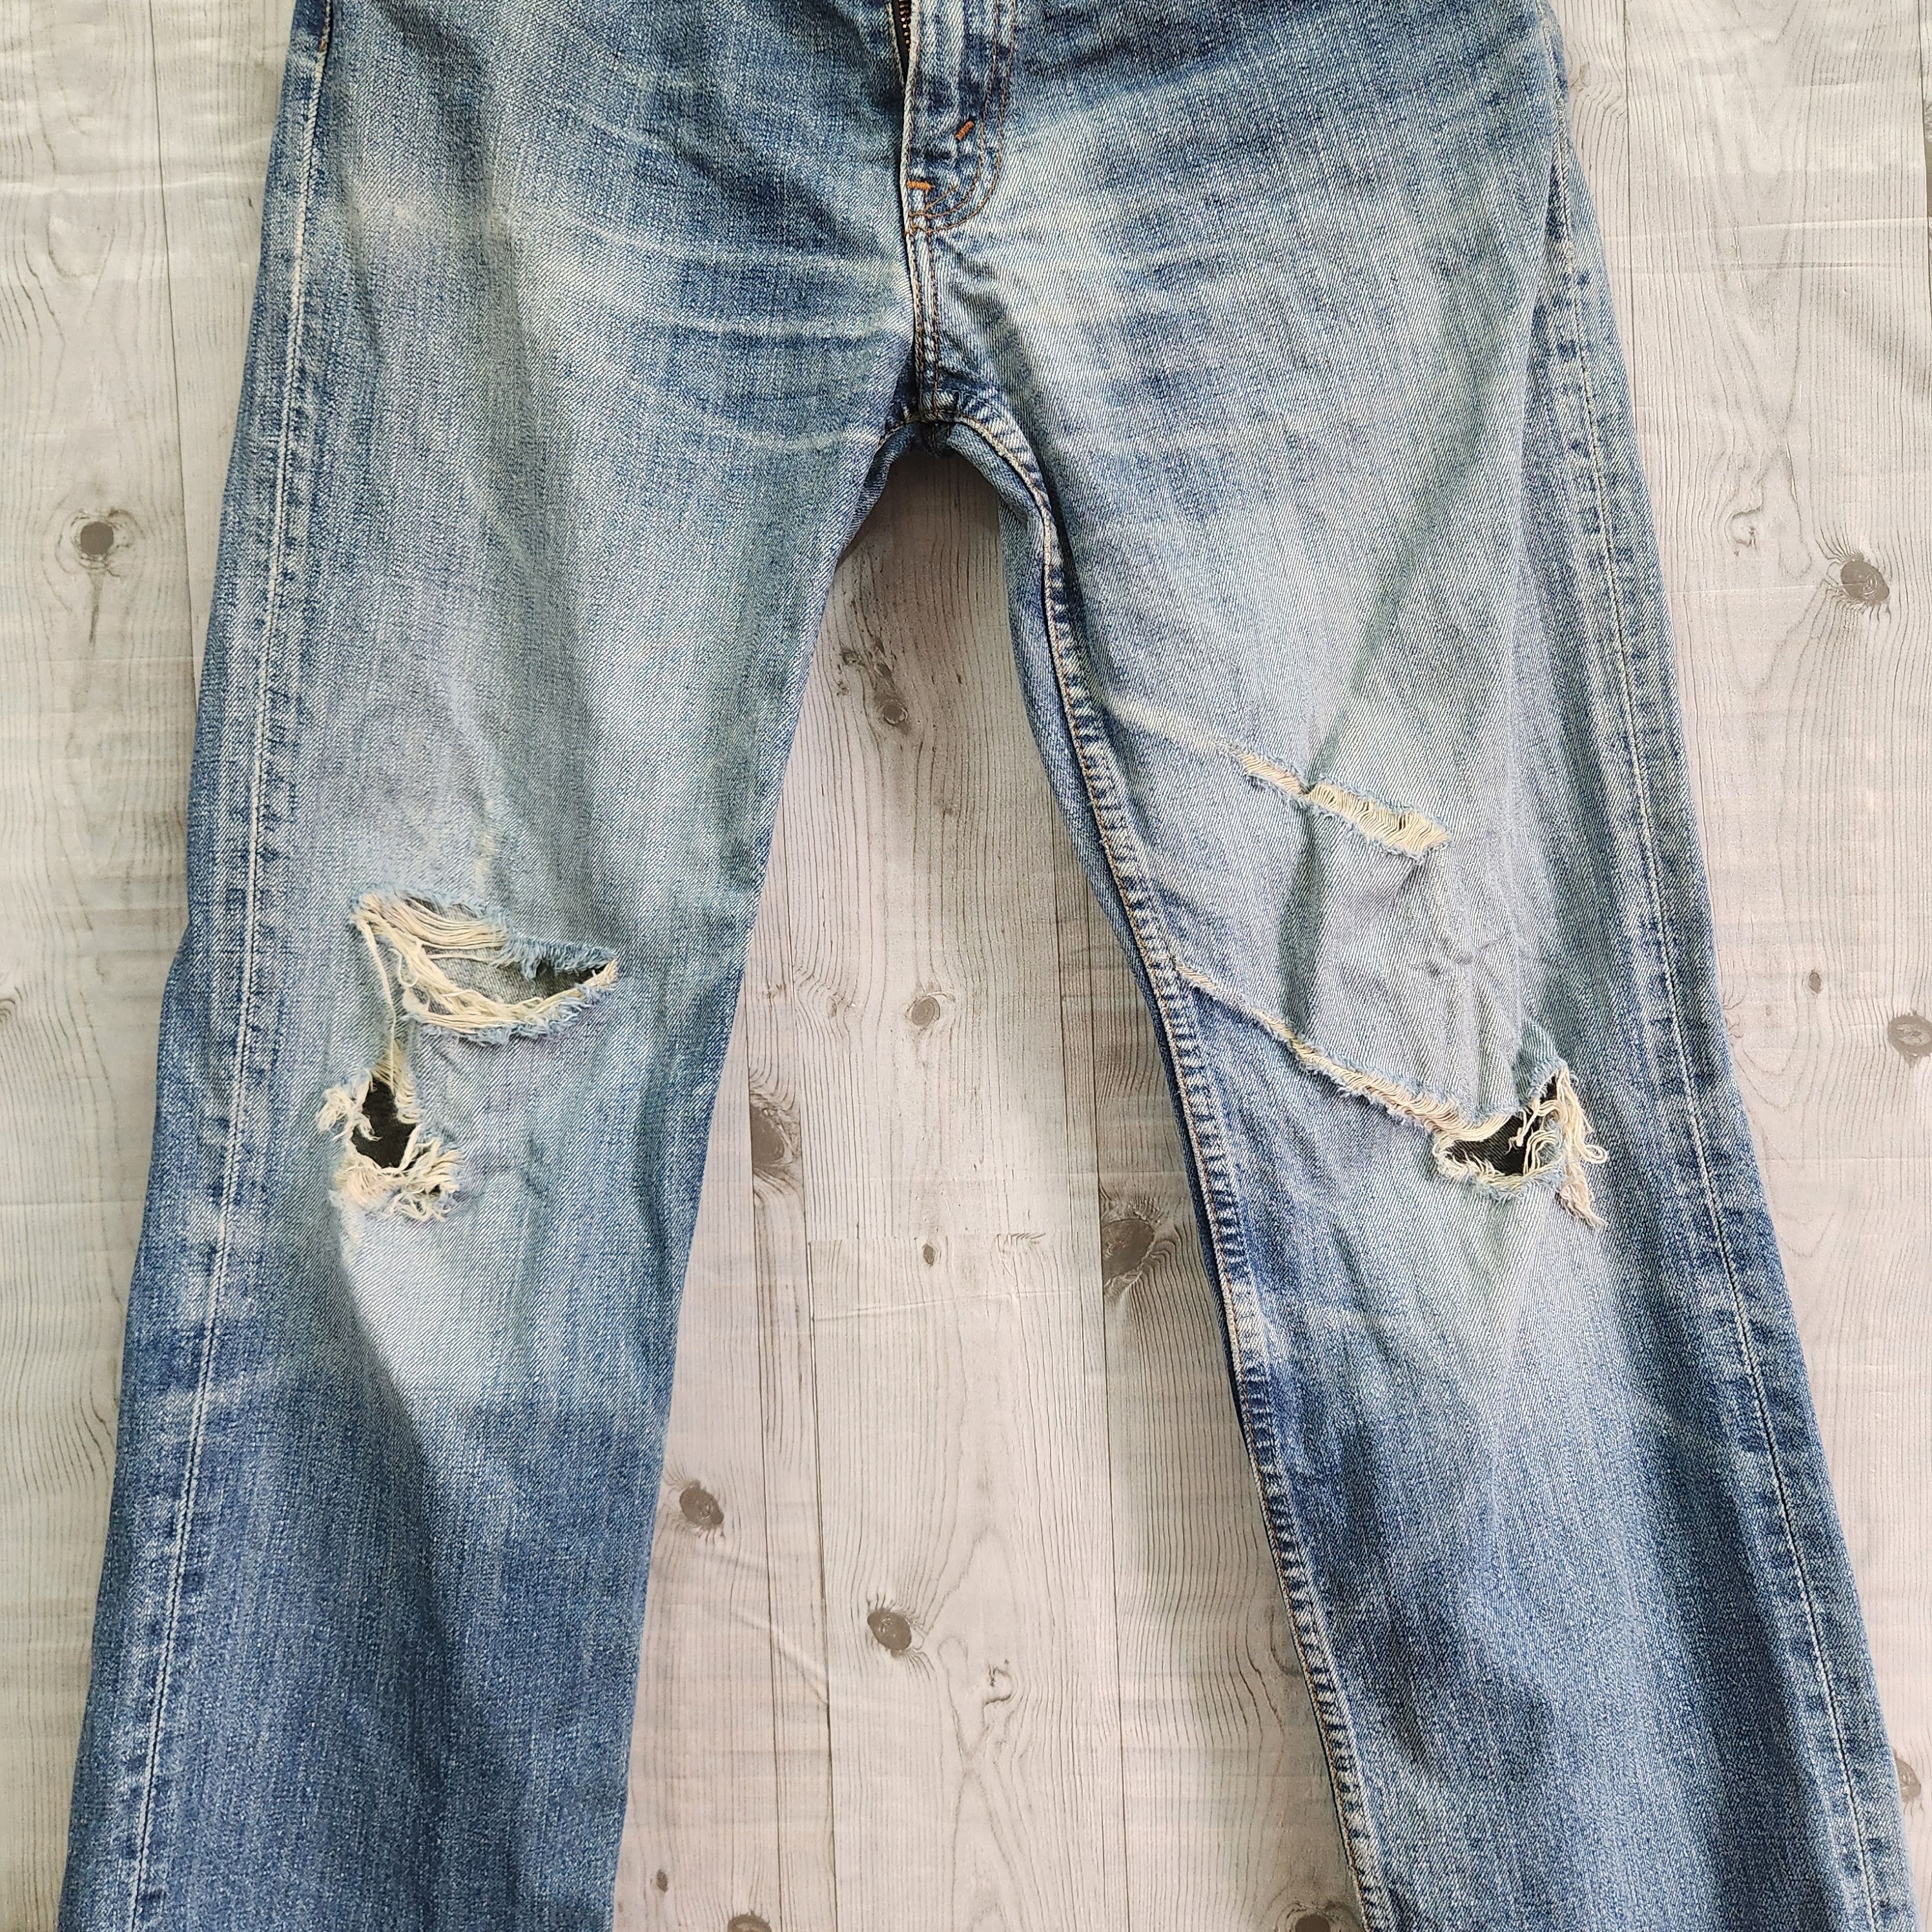 Levis 502 Vintage Distressed Ripped Denim Jeans Year 2002 - 2